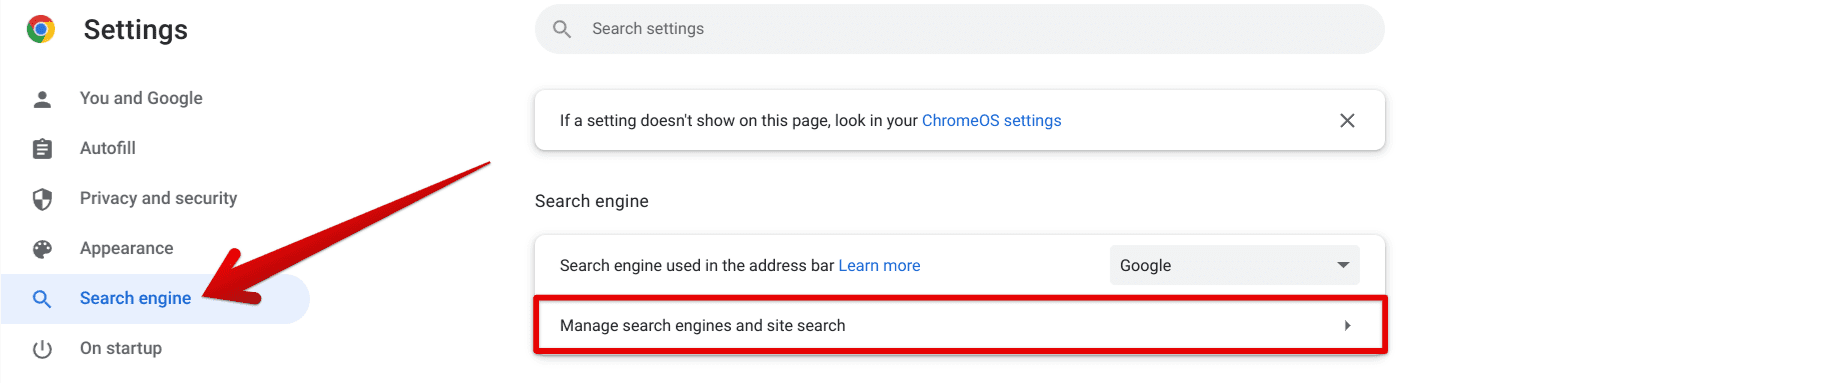 Accessing the Site Search section in Chrome